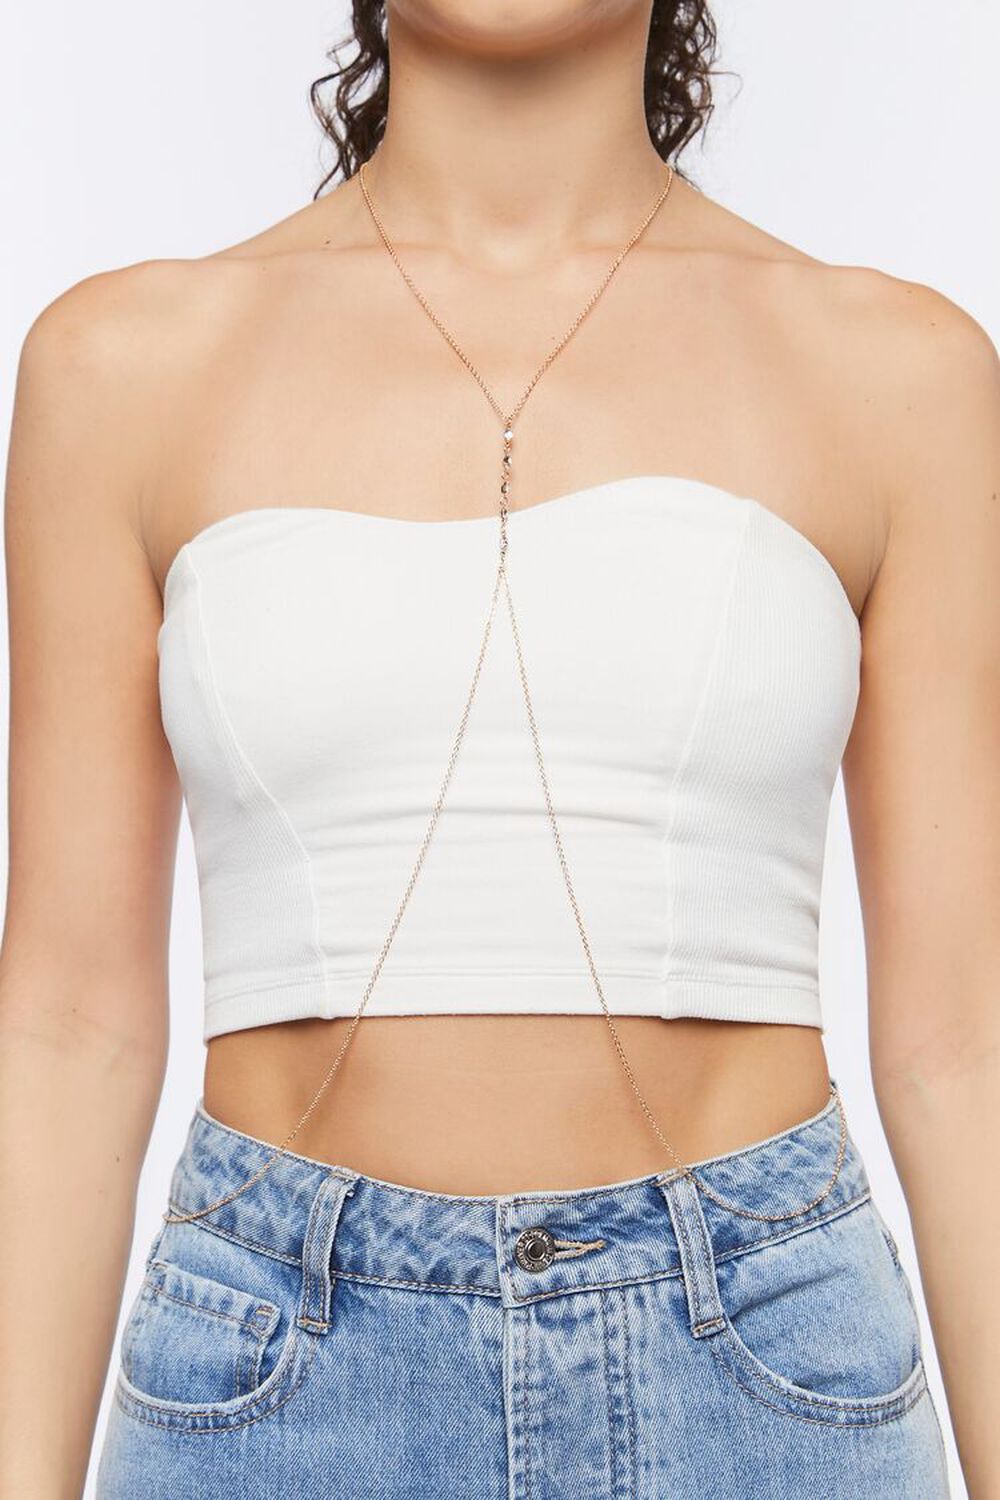 GOLD/CLEAR Faux Gem Body Chain, image 1